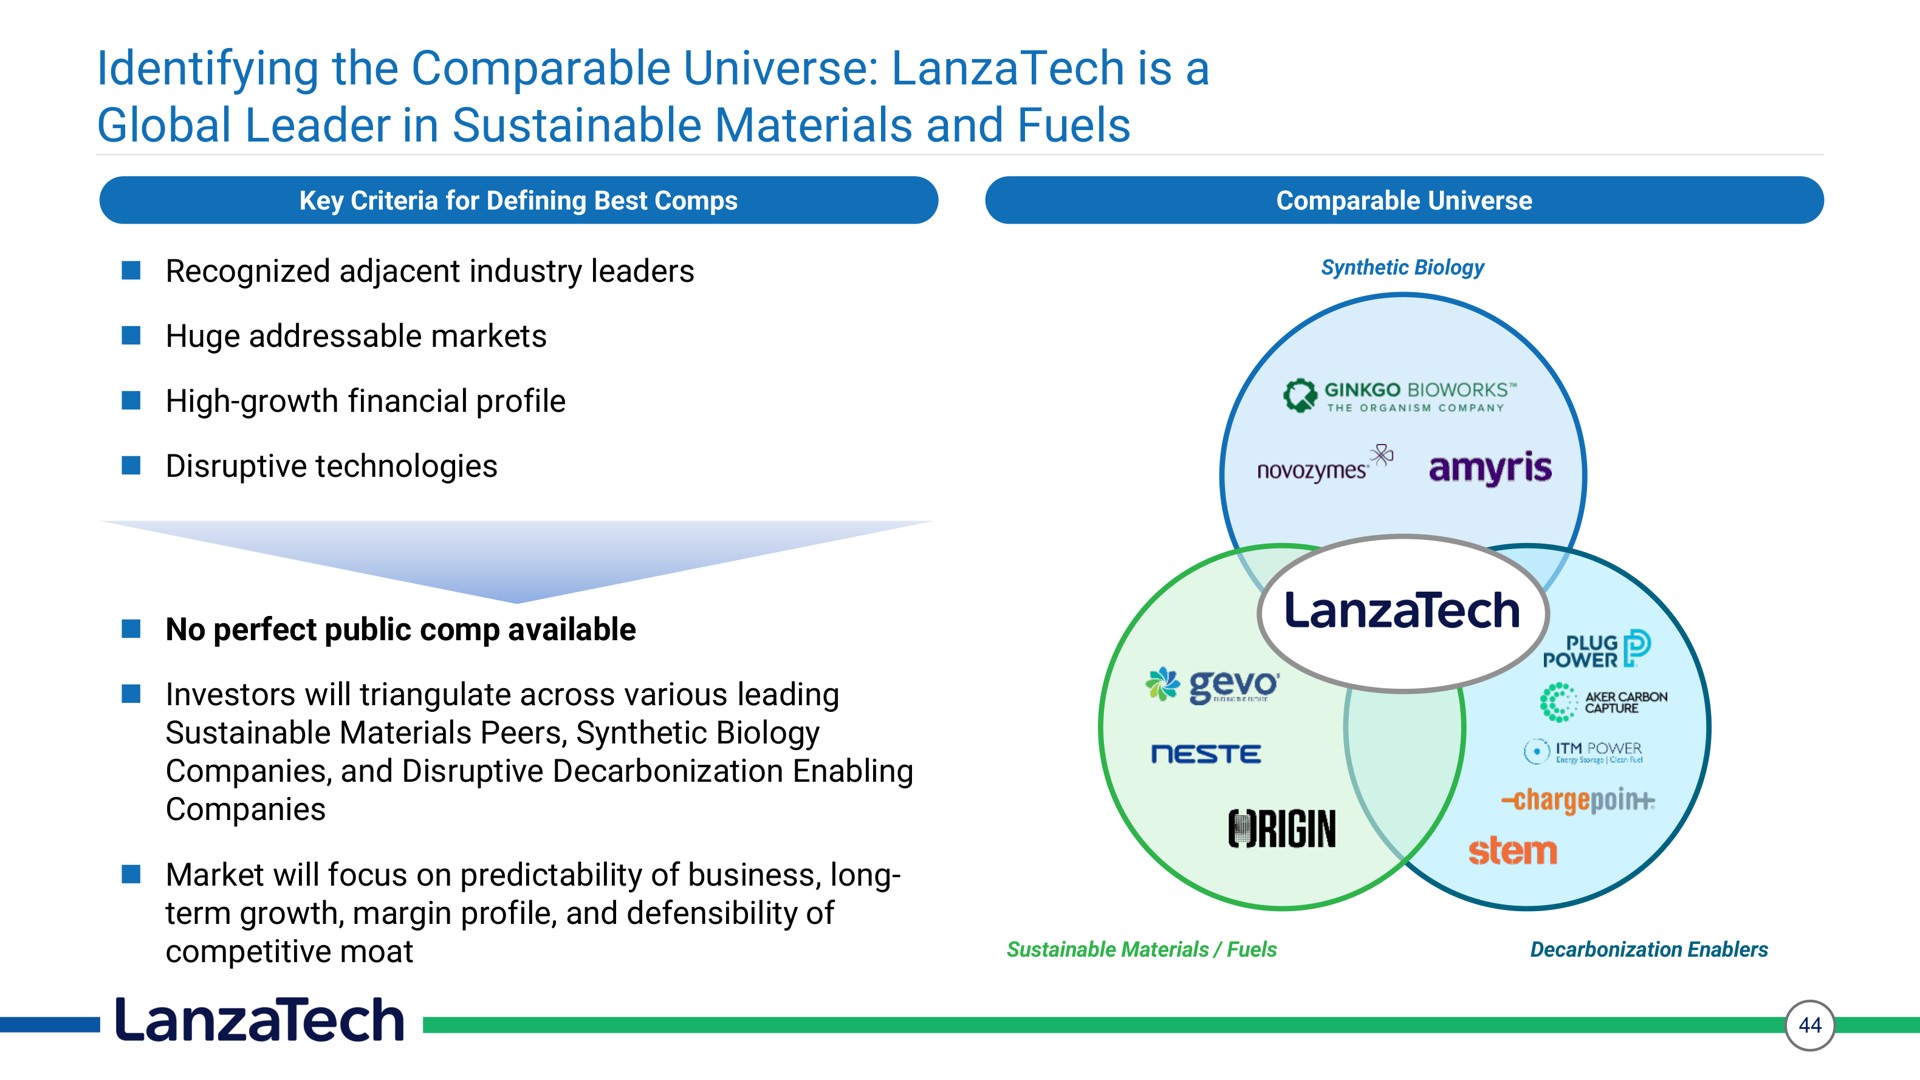 identifying the comparable universe is a global leader in sustainable materials and fuels origin stem | LanzaTech